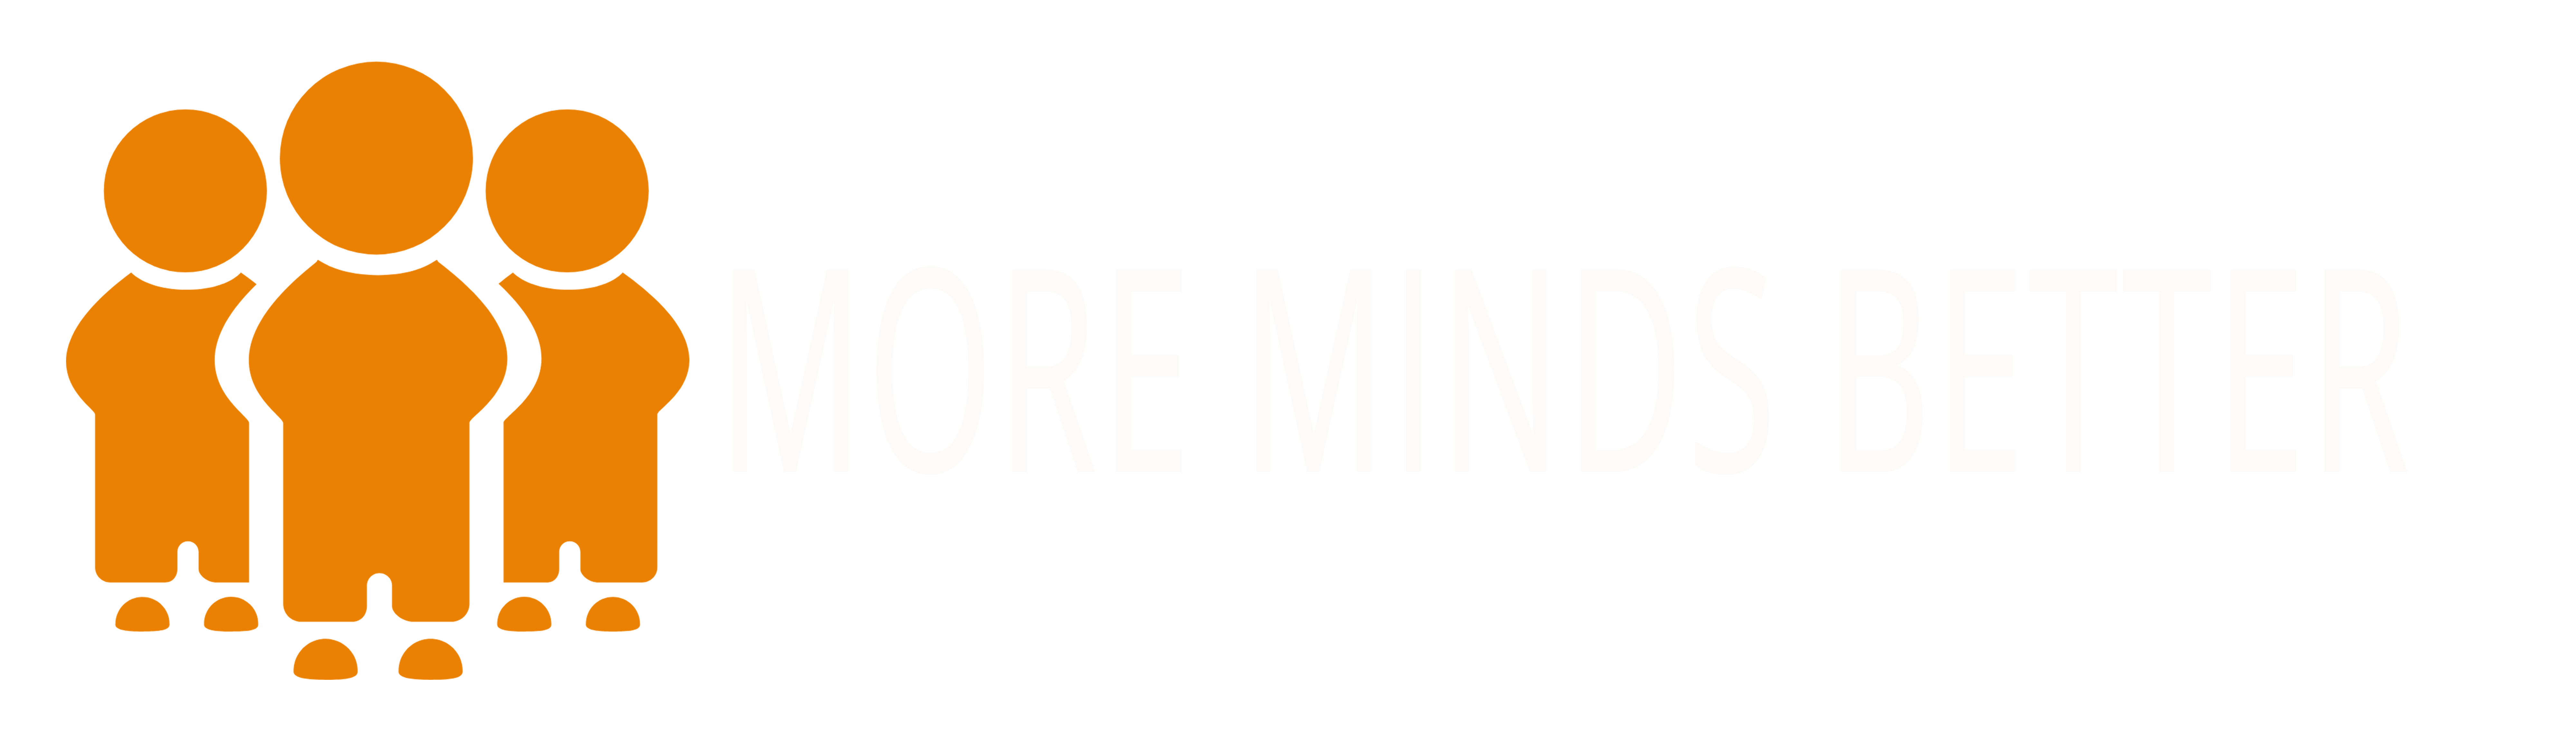 More Minds Better